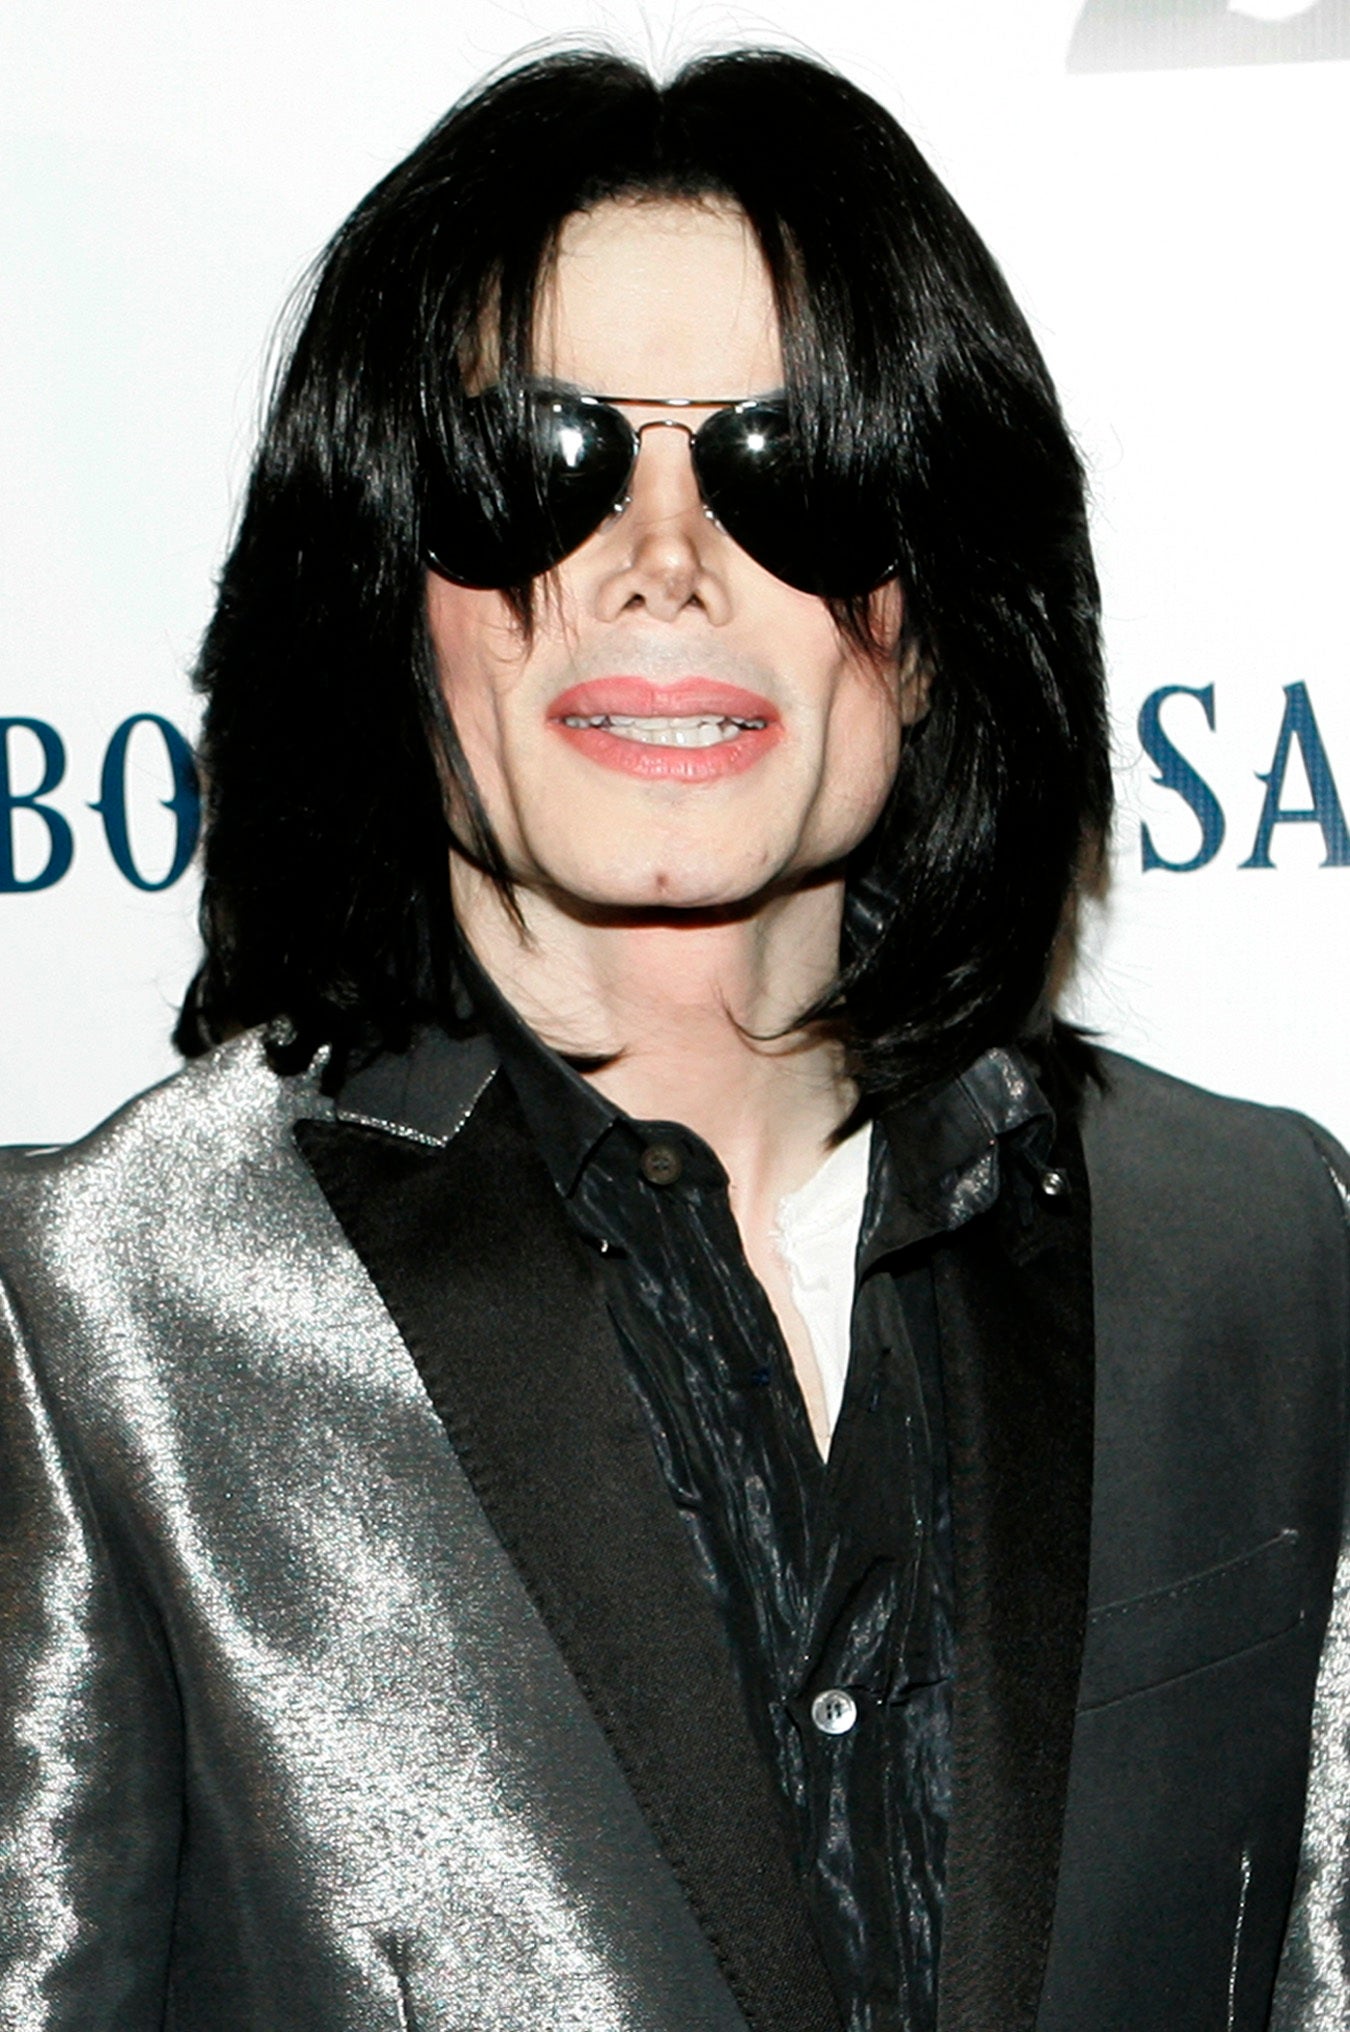 New Michael Jackson Album To Be Released in May